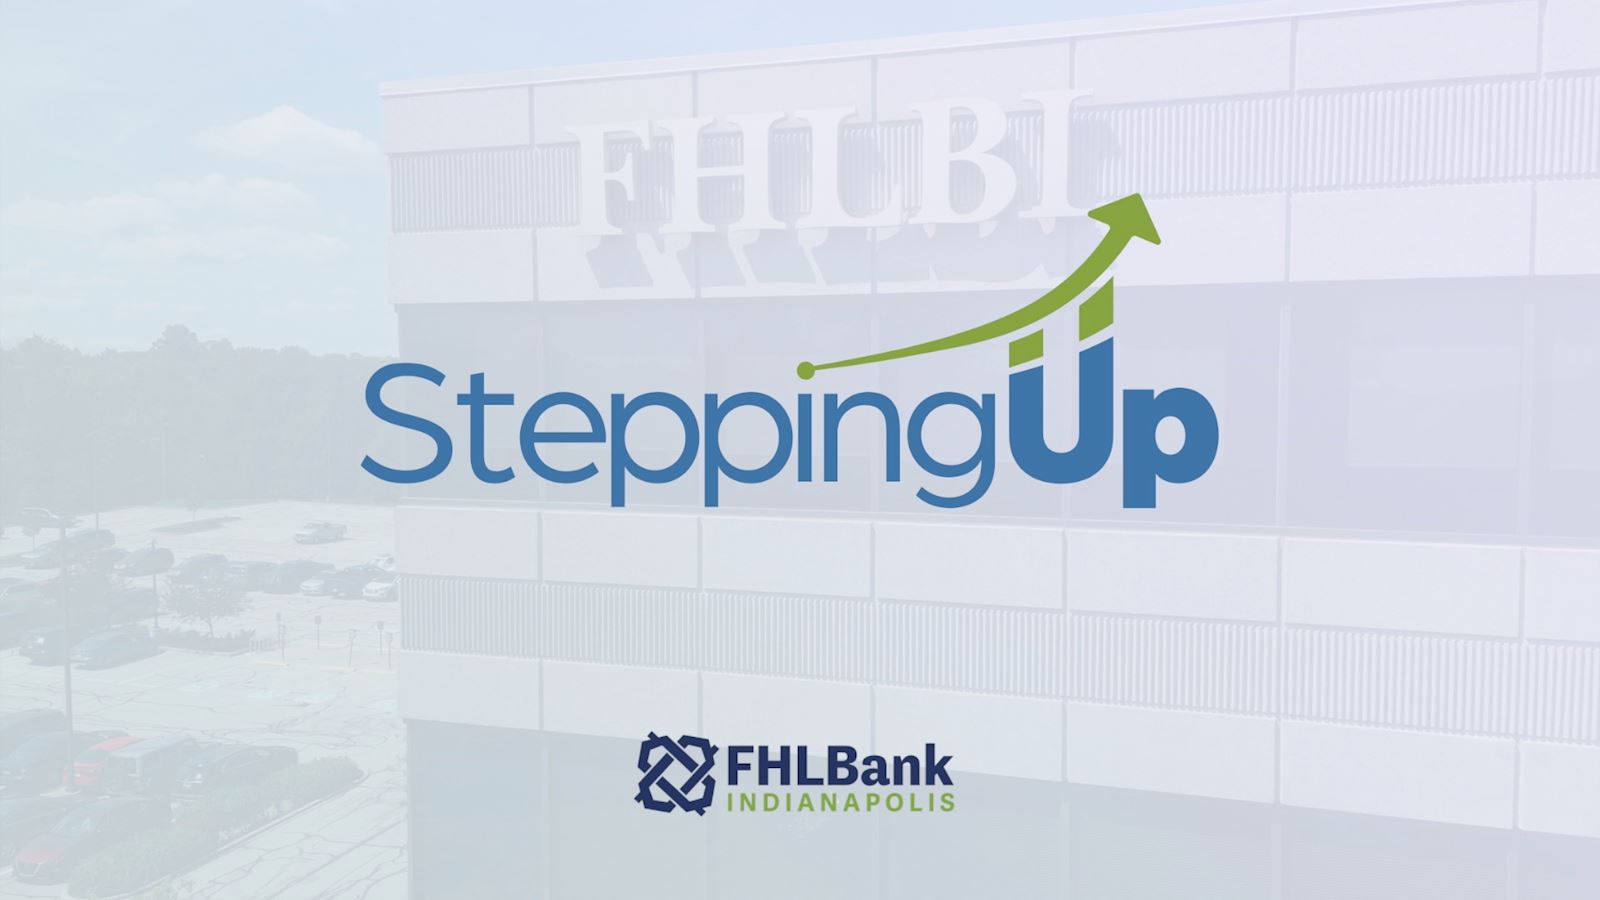 At Federal Home Loan Bank Indianapolis, we're stepping up.